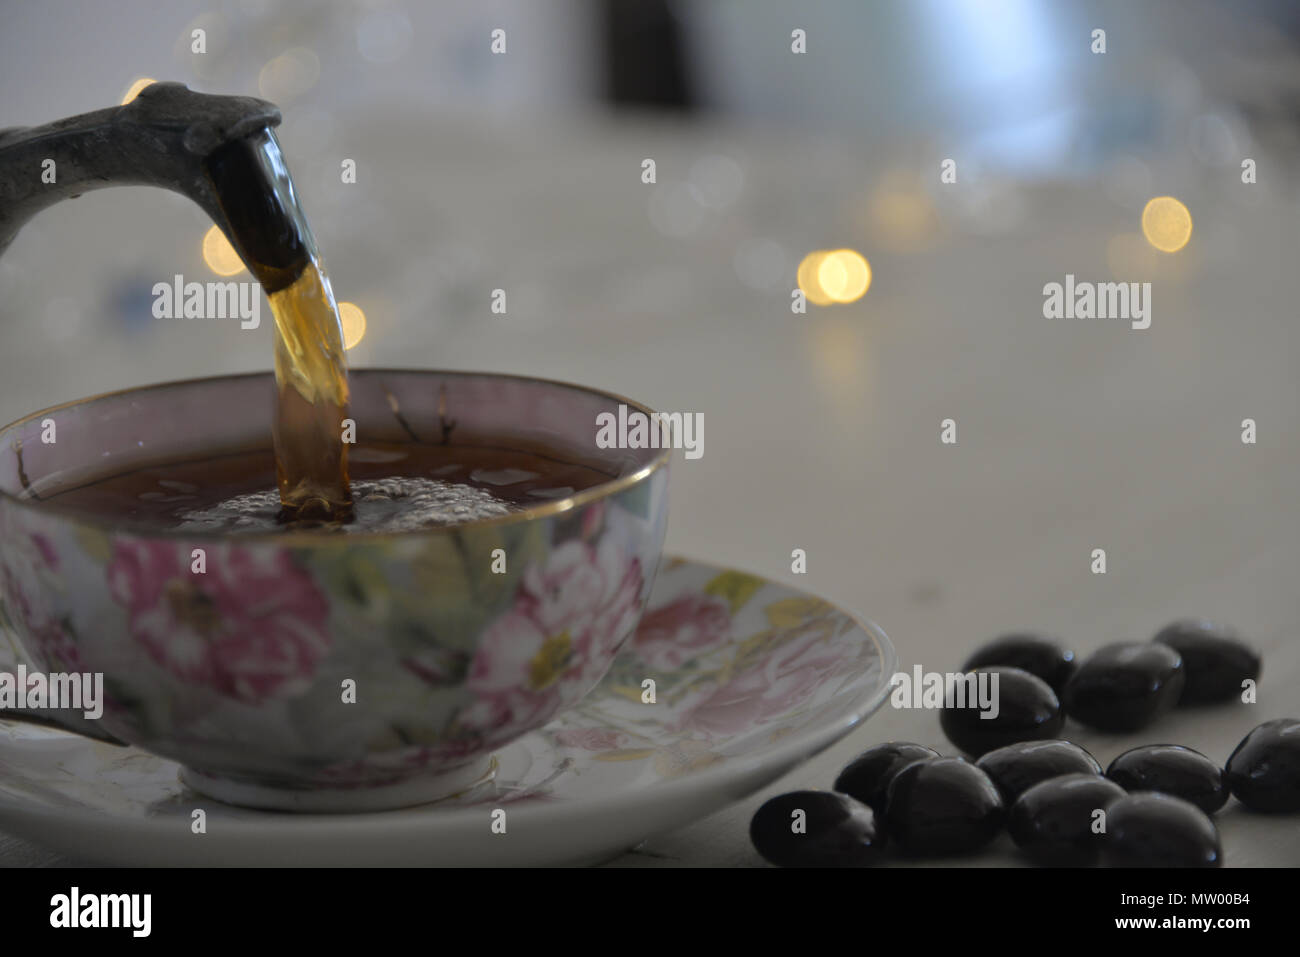 Pouring tea into a tea cup and chocolate confectionary Stock Photo